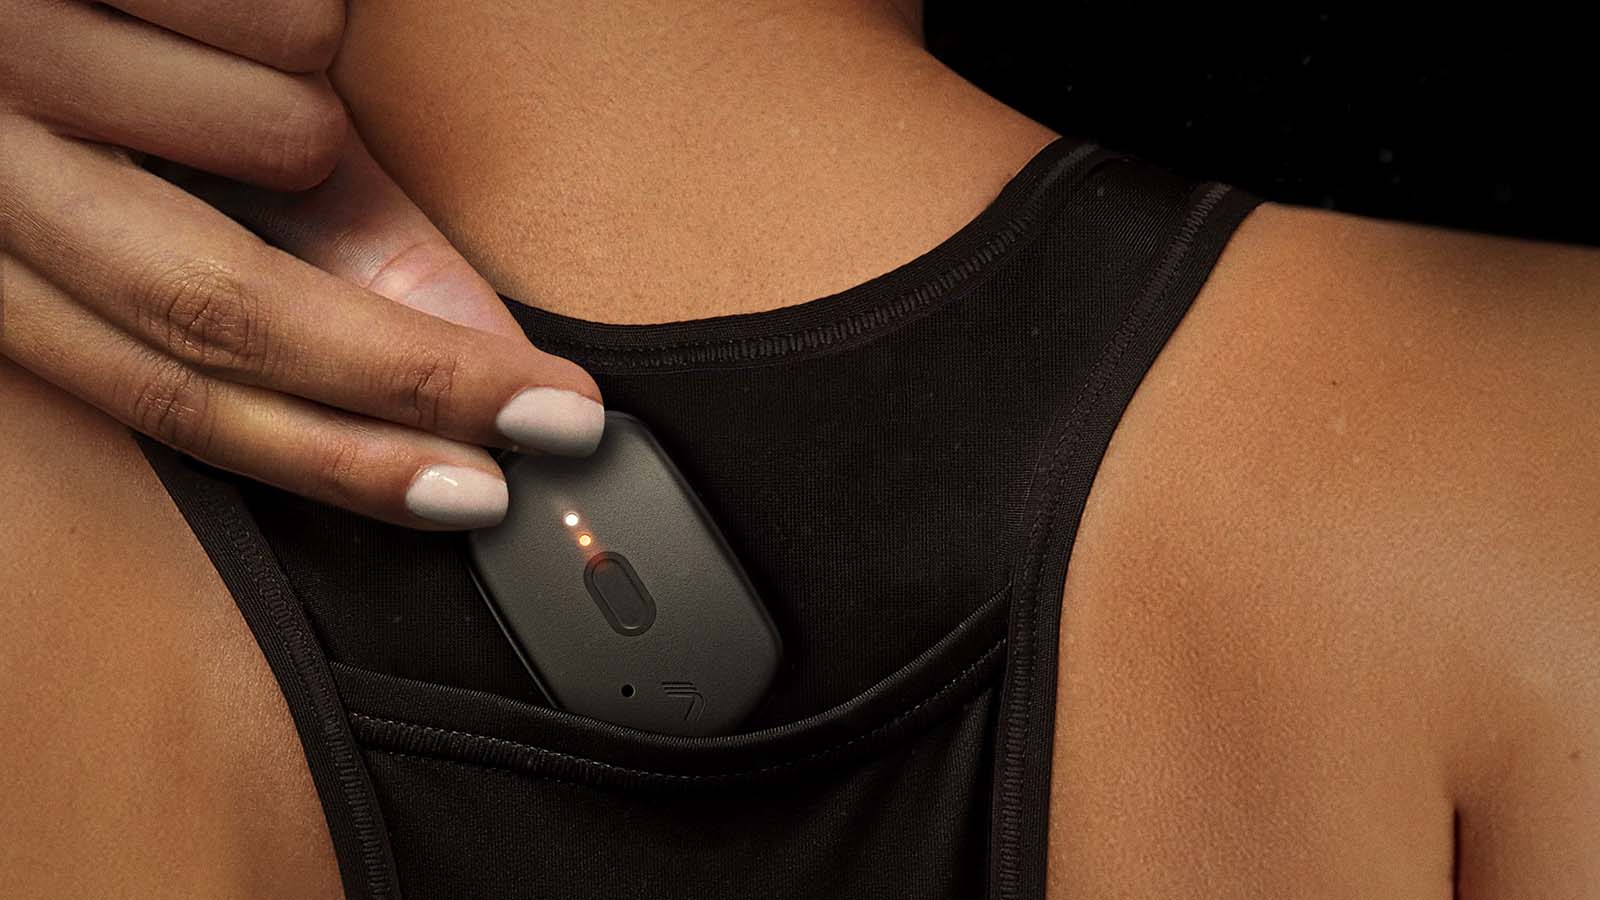 An image of a female basketball player placing the T7 device into the Basketball Jersey Pocket.